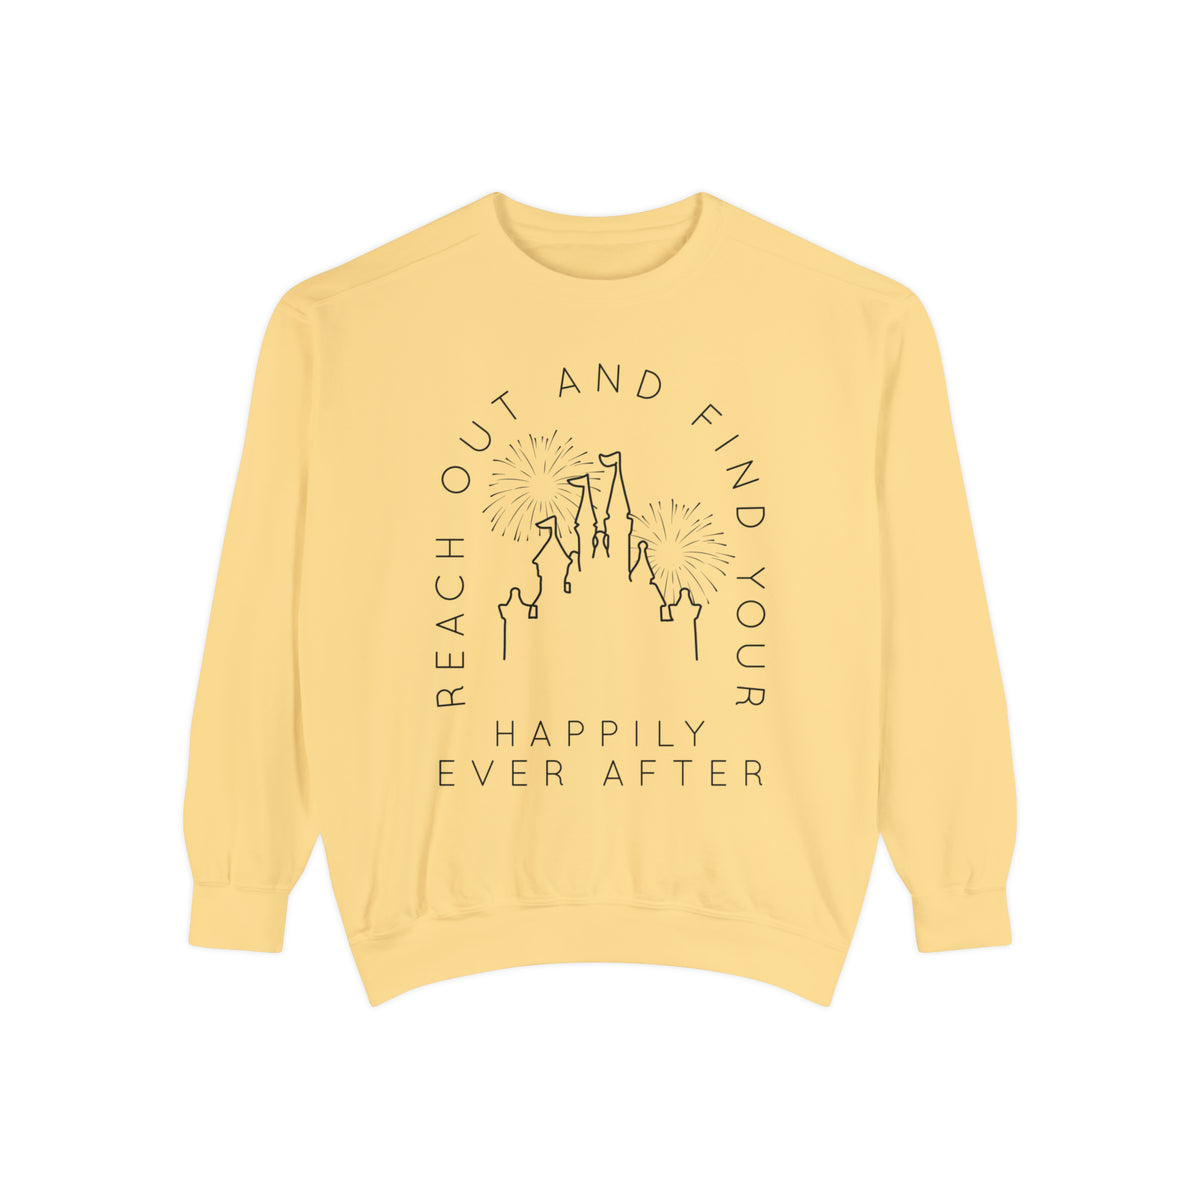 Reach Out And Find Your Happily Ever After Comfort Colors Unisex Garment-Dyed Sweatshirt